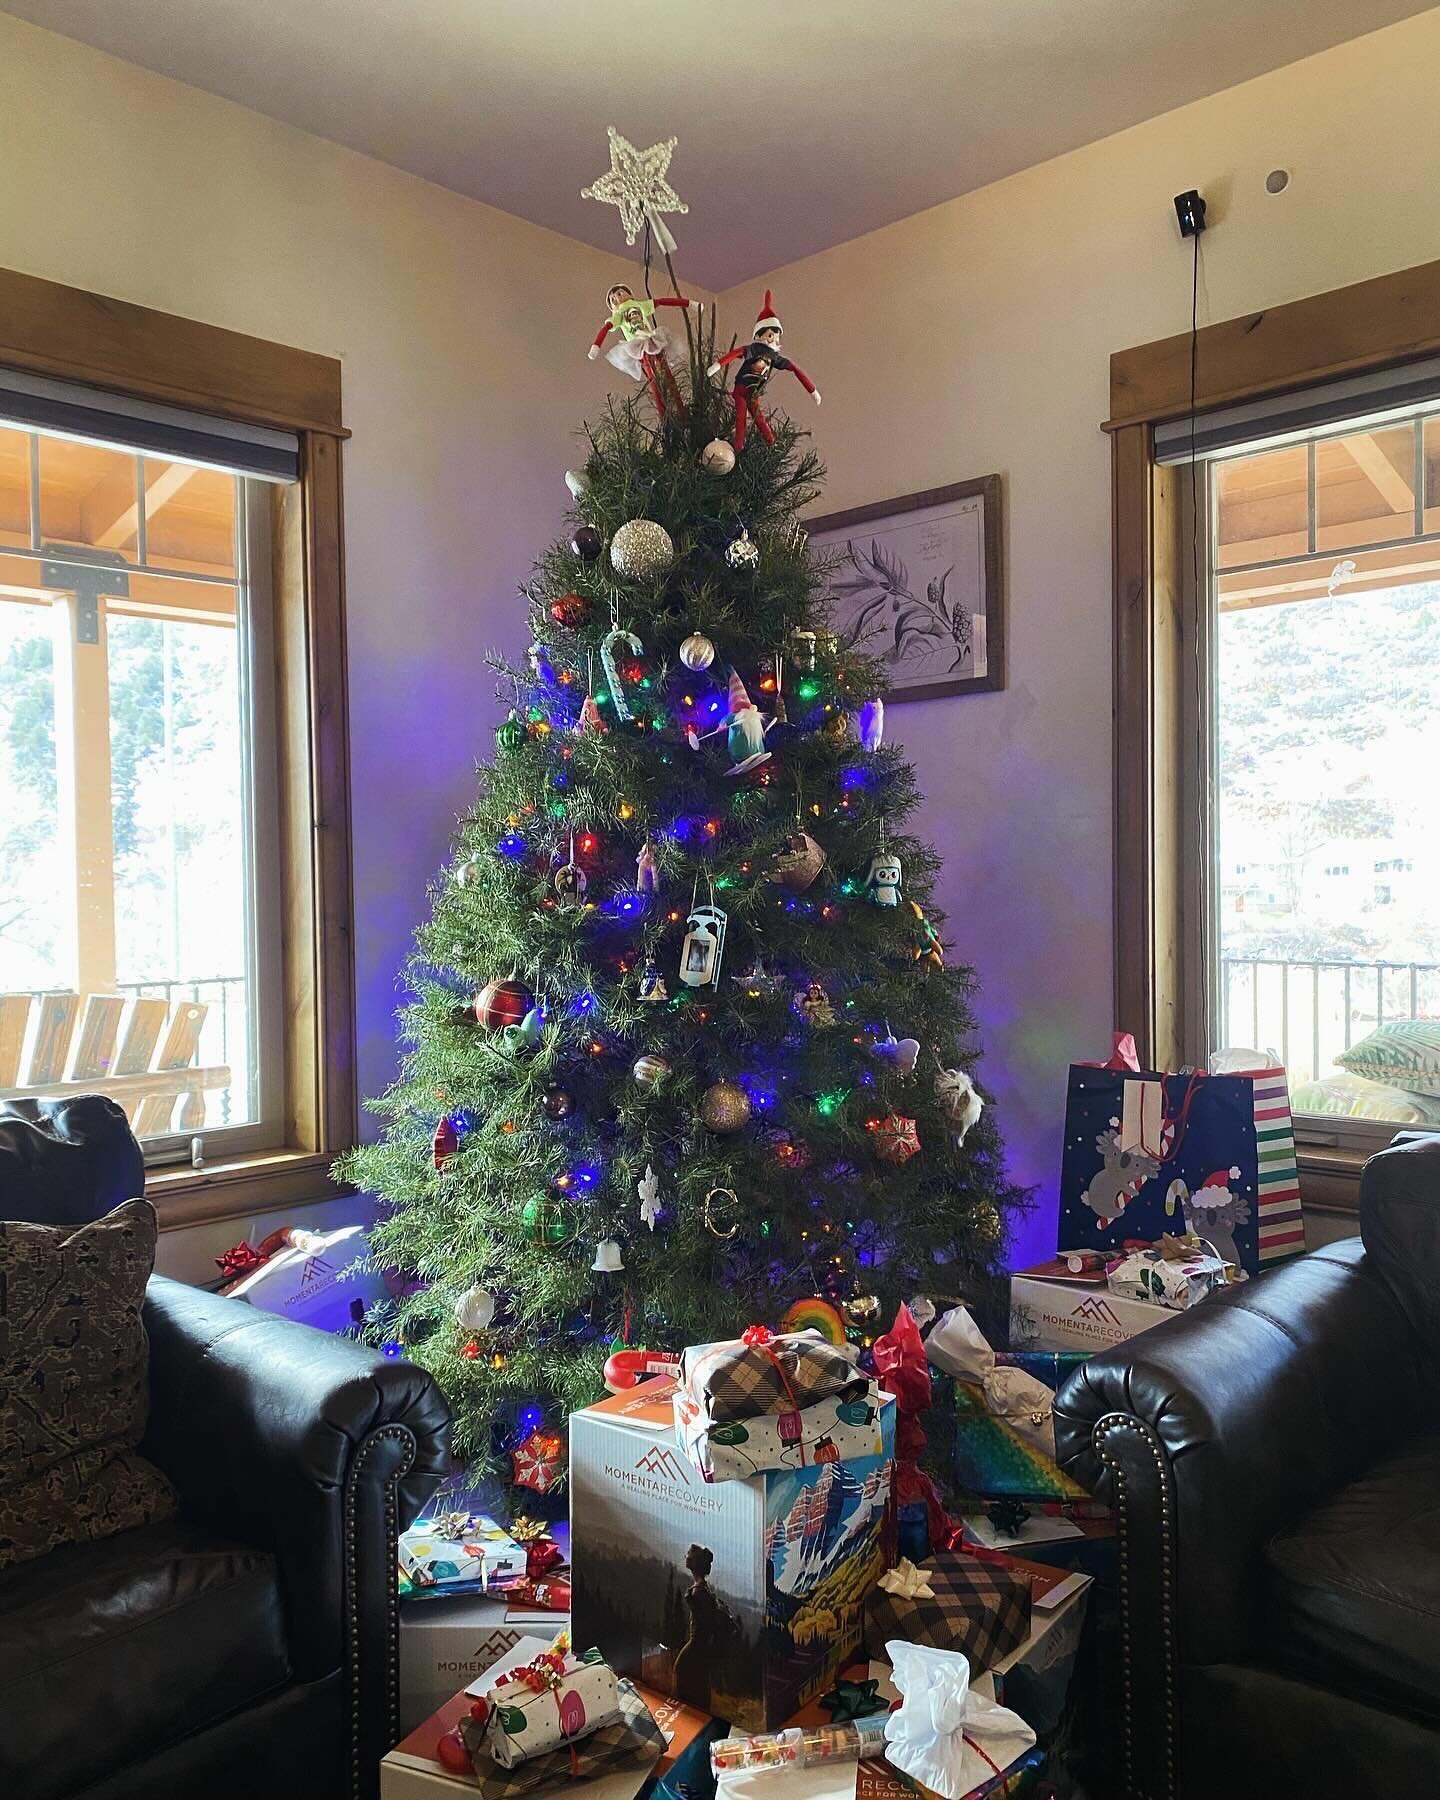 Holidays can be hard in (and out) of treatment. We make them special by opening gifts together, stuffing each other&rsquo;s stockings with notes of gratitude and appreciation, playing games, watching holiday movies, and sharing a big holiday feast. ?